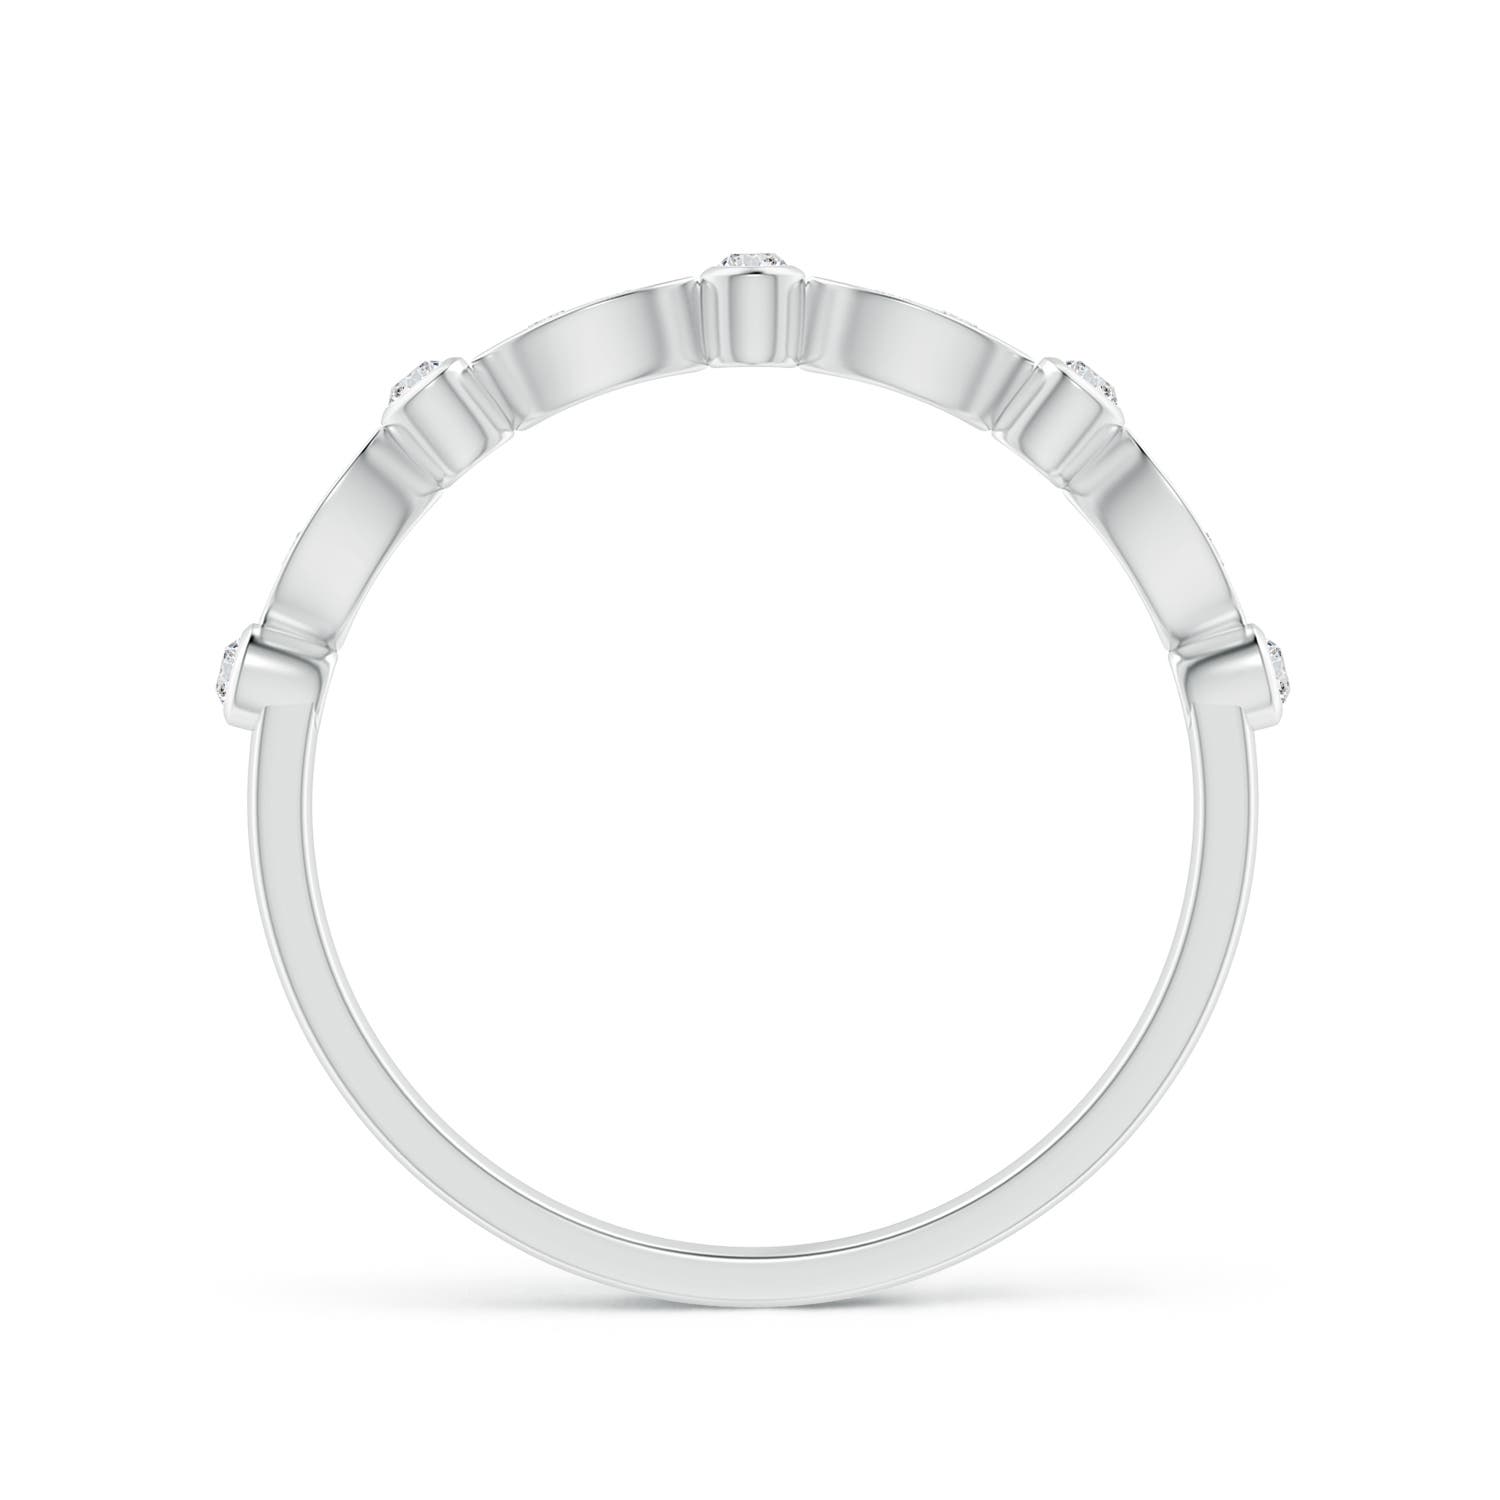 H, SI2 / 0.09 CT / 14 KT White Gold